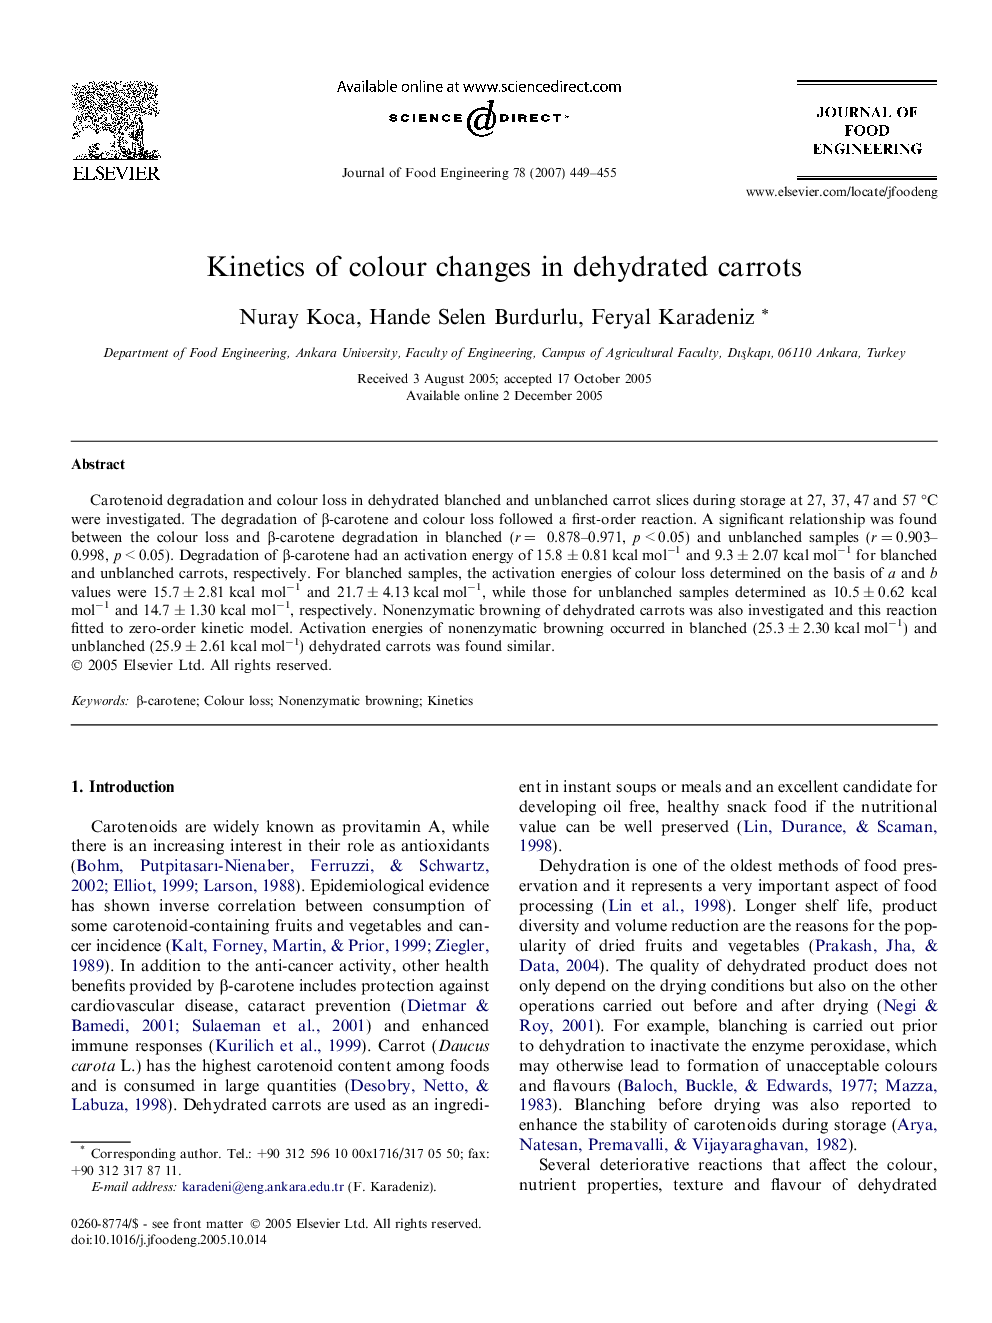 Kinetics of colour changes in dehydrated carrots